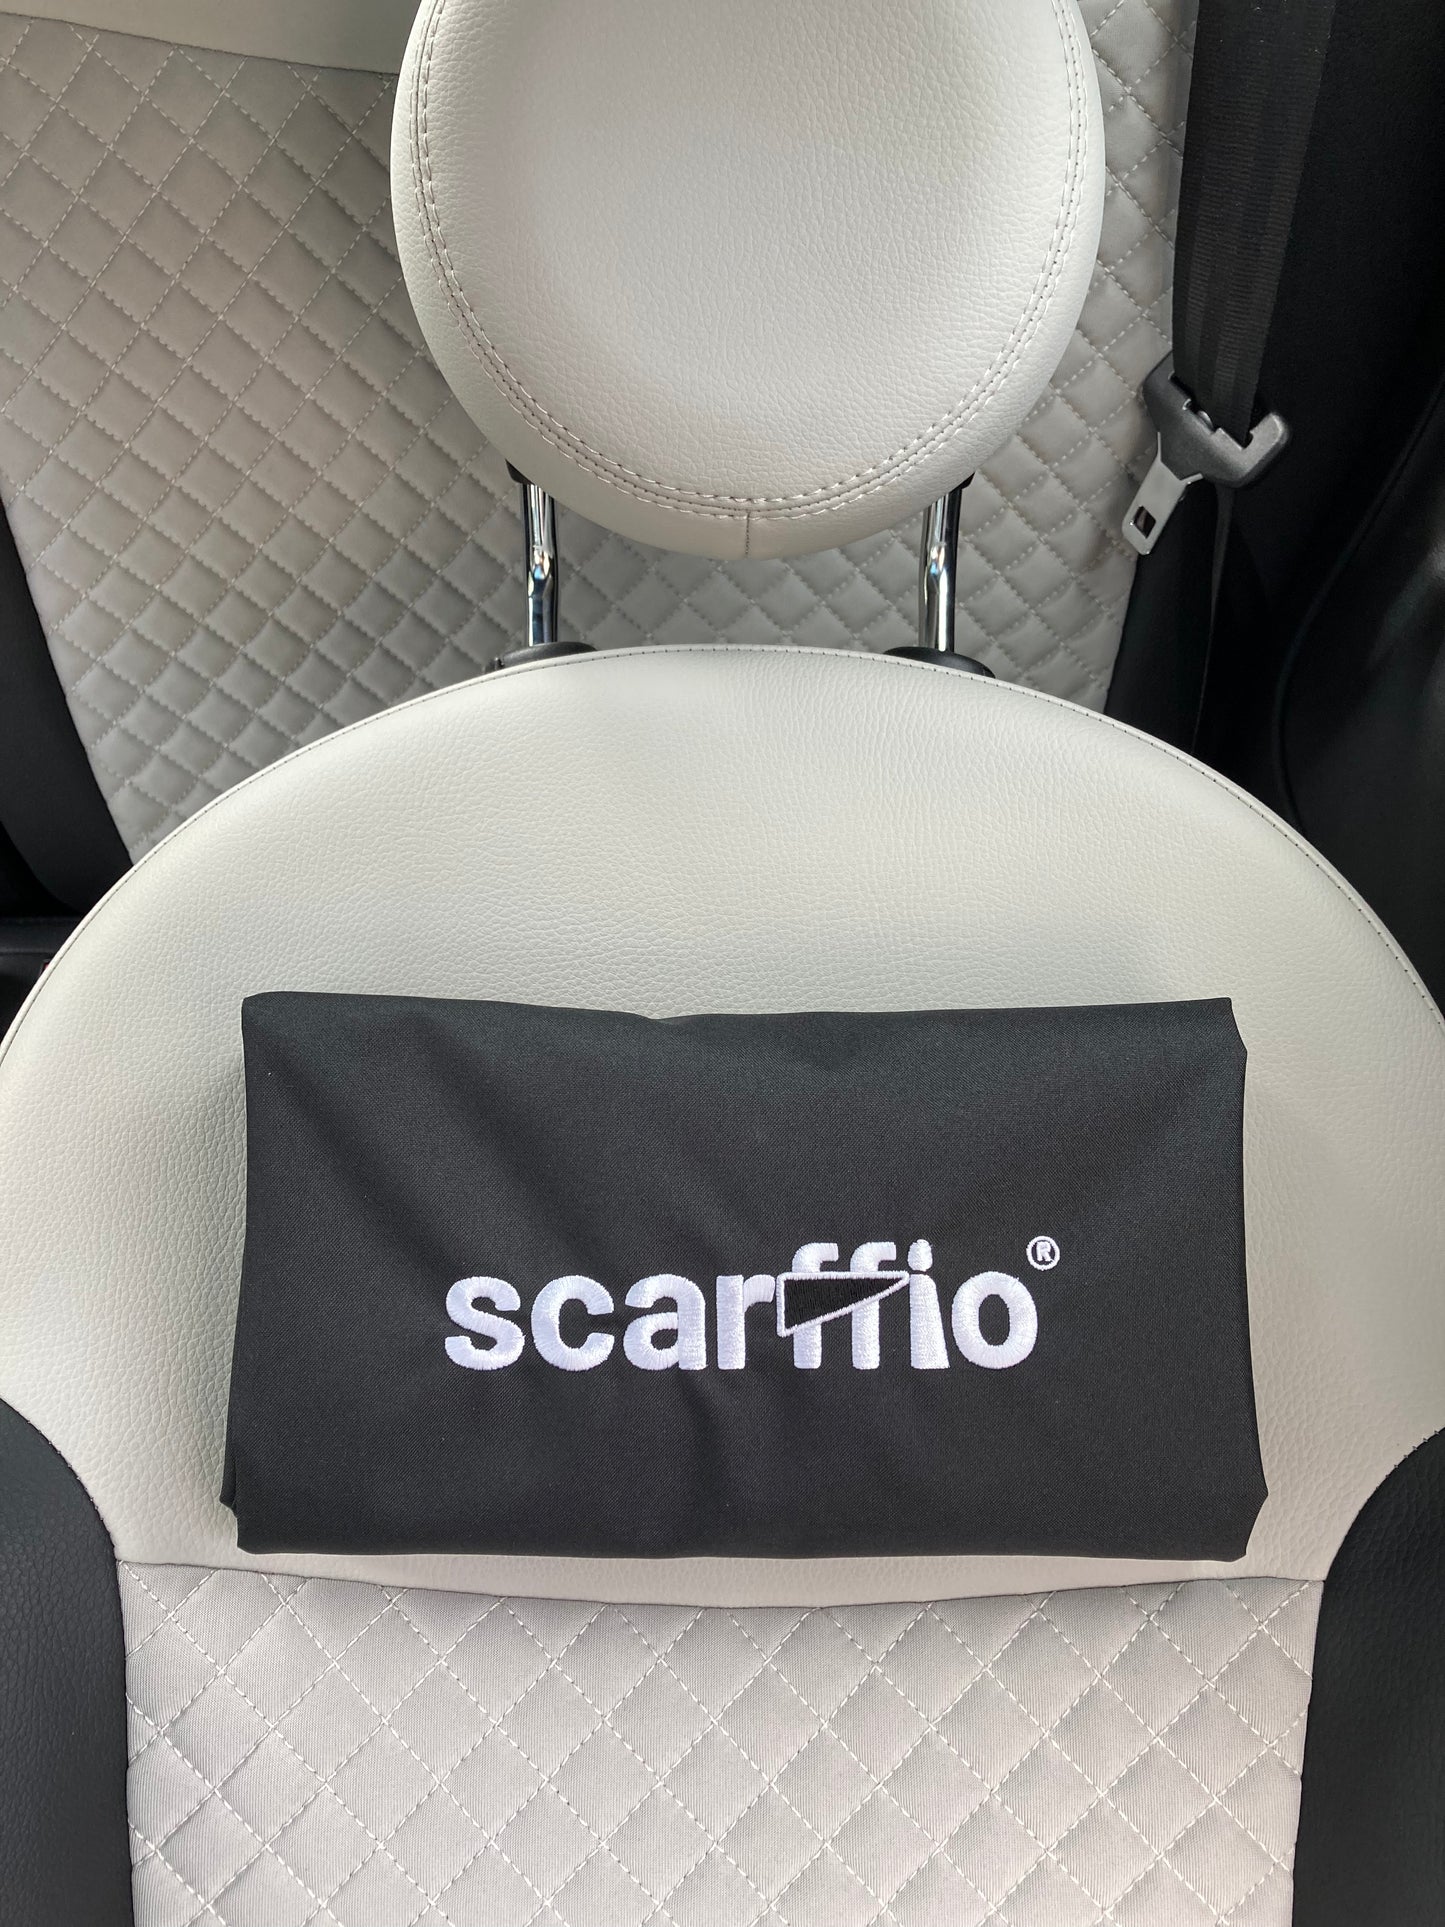 This image shows a a folded Jet Black scarffio®, resting on a cream and black quilted car seat. The focus of the image is  the white embroidered scarffio®  logo with its matching black cape detail. 